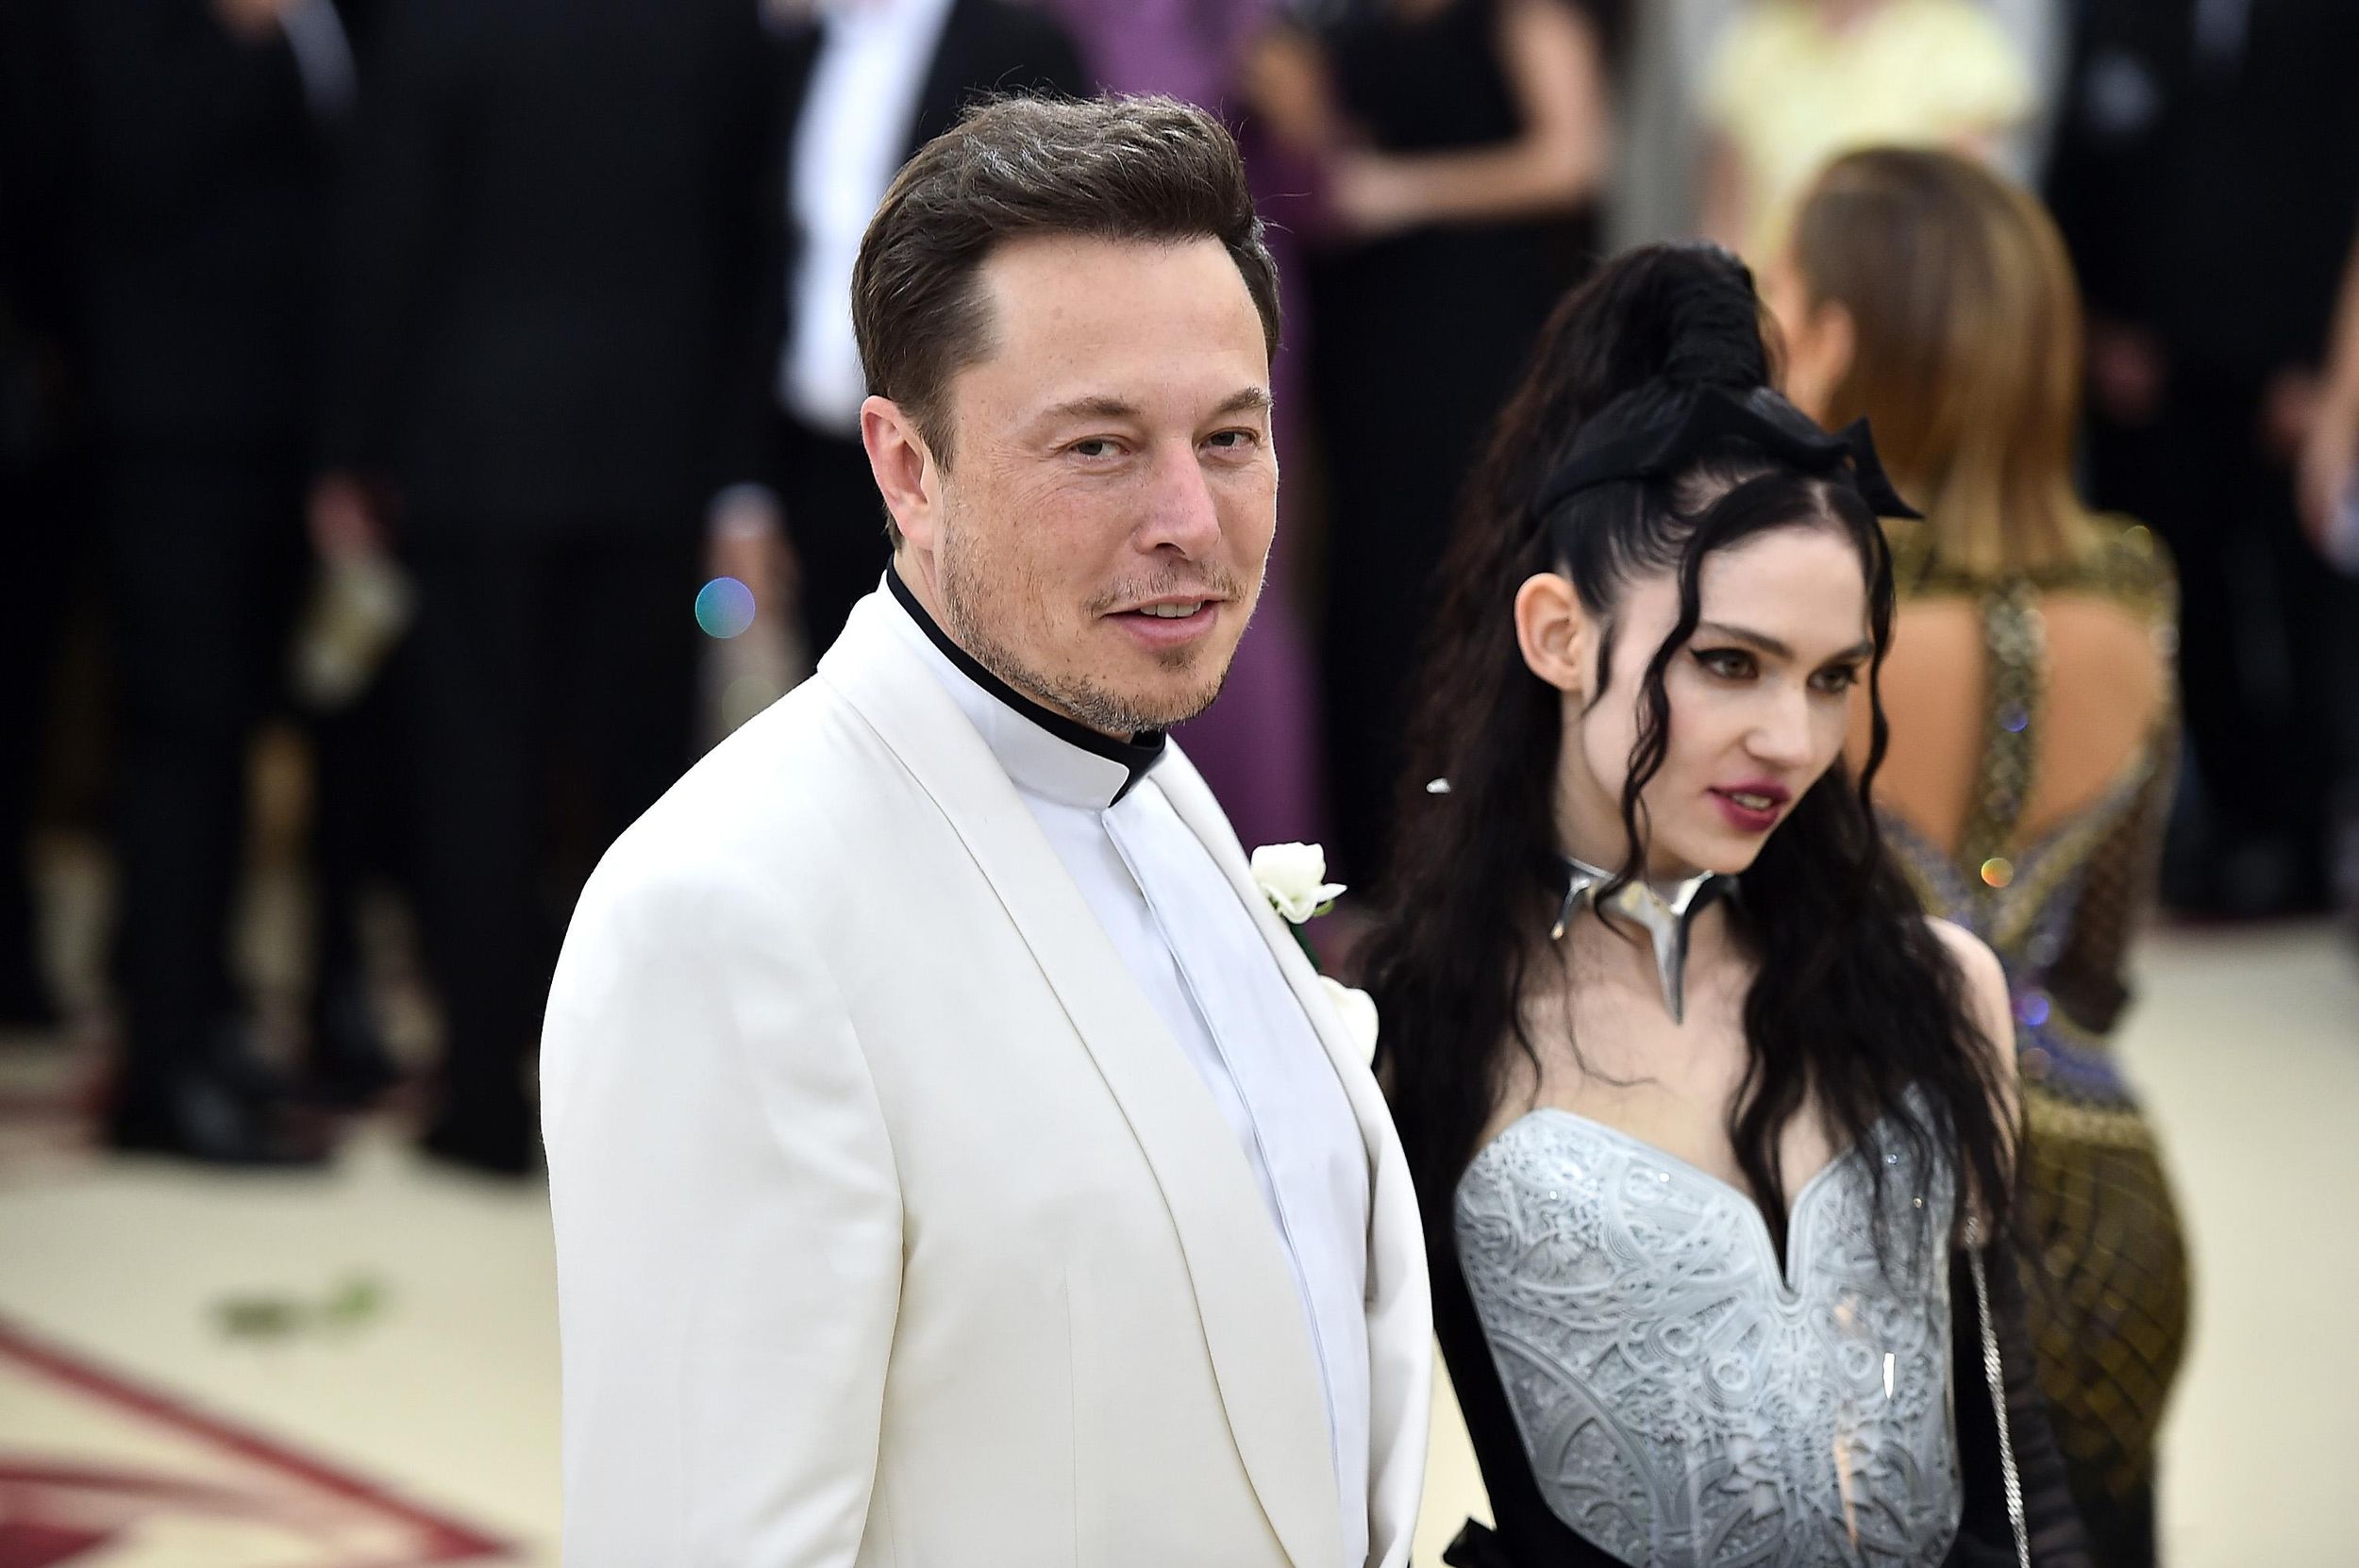 Grimes Faces Backlash For Claiming Billionaire Ex Elon Musk 'Lives At Times Below The Poverty Line'